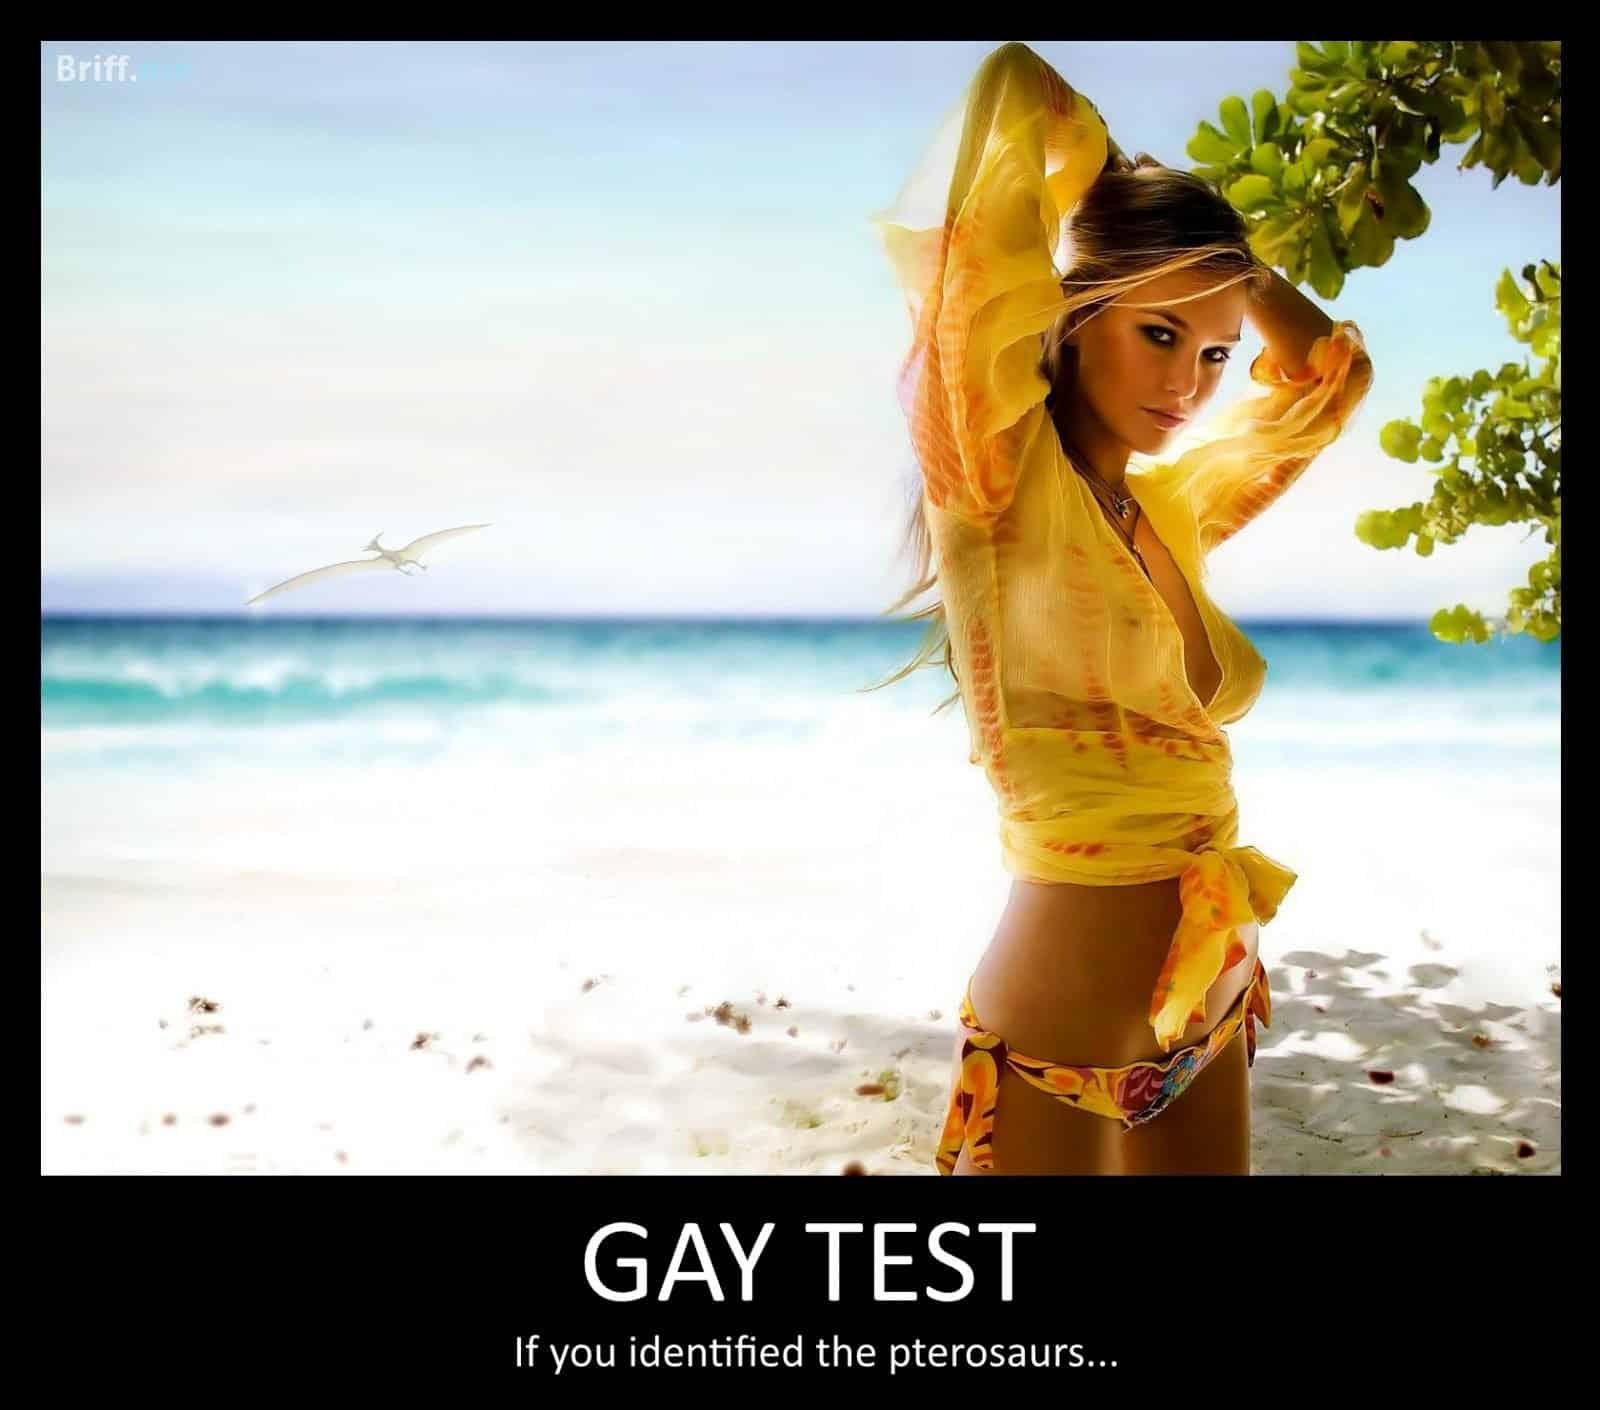 The Real Gay Test 112